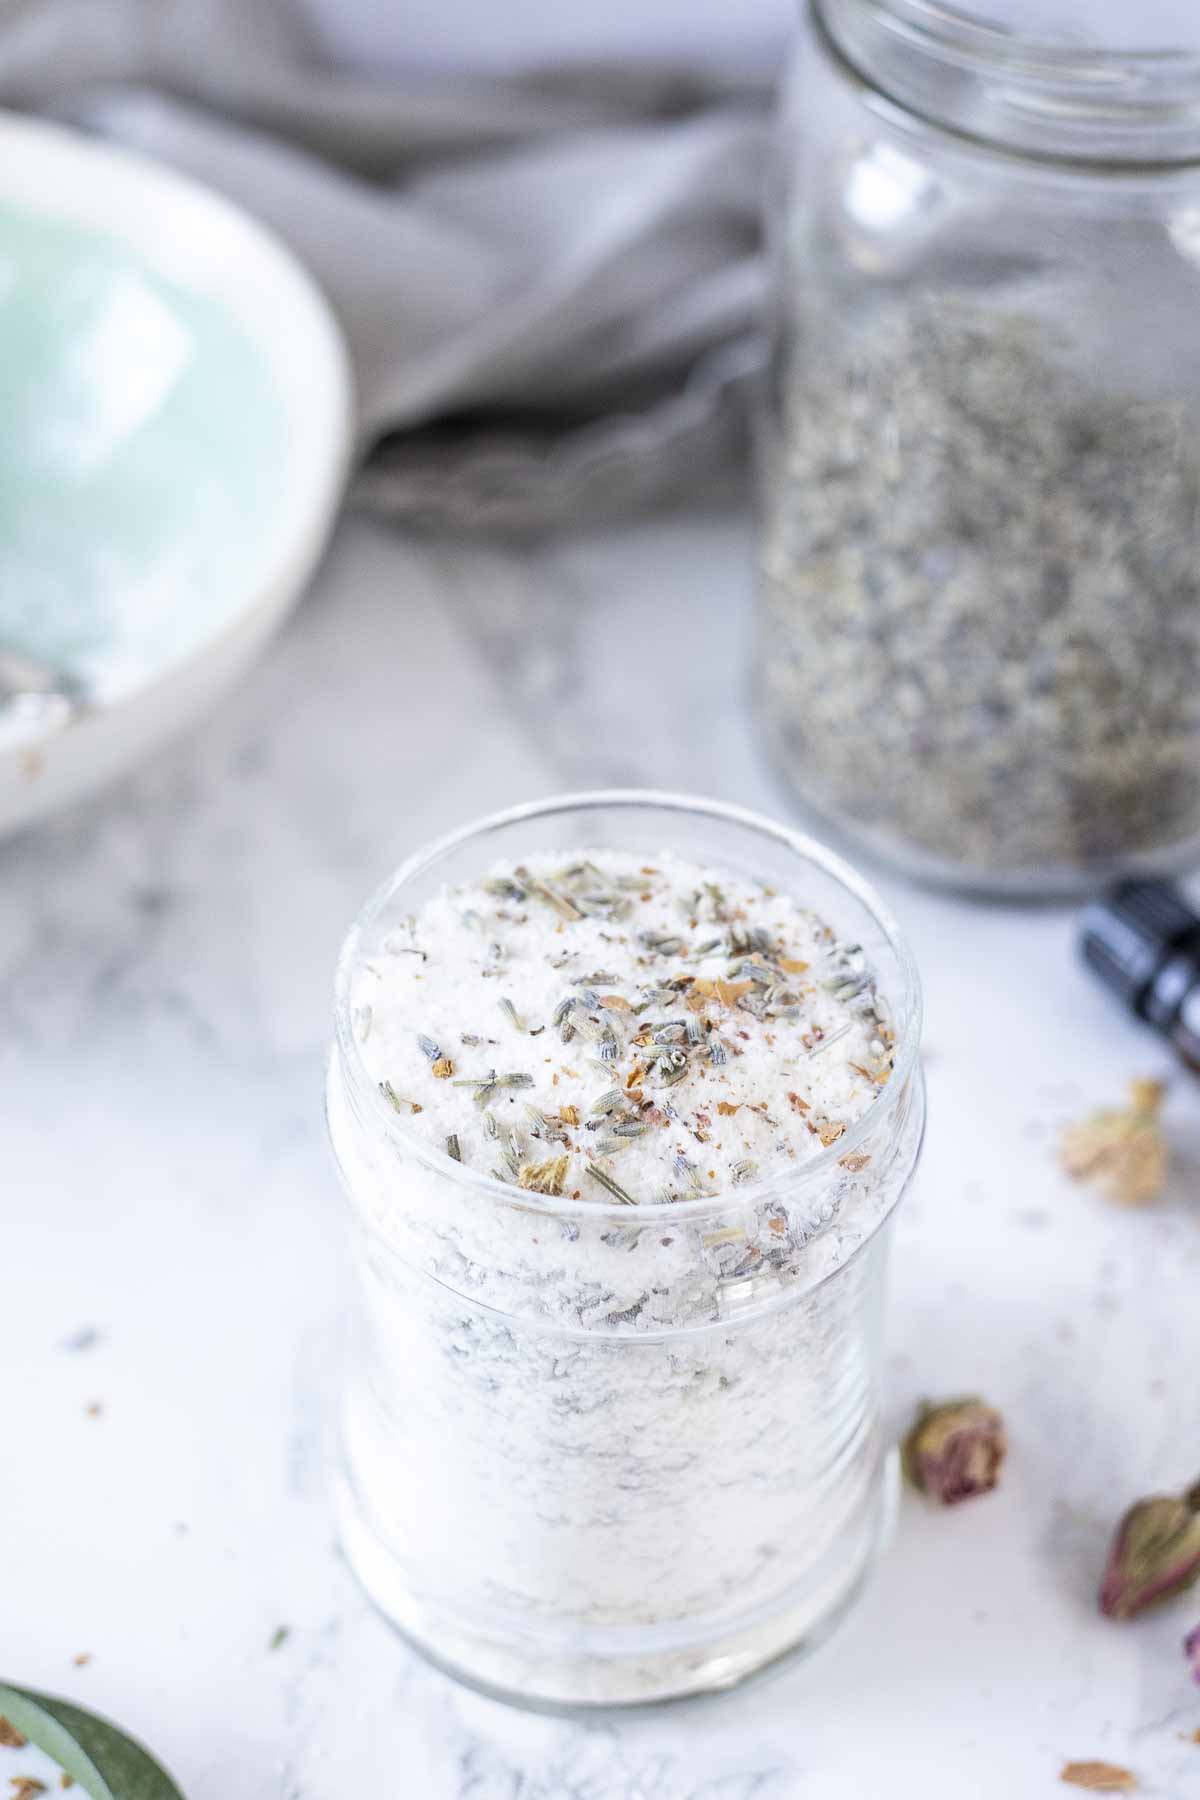 Epson salt bath salts with dried flowers in a glass jar. jars and bowls of dried flowers are in the background